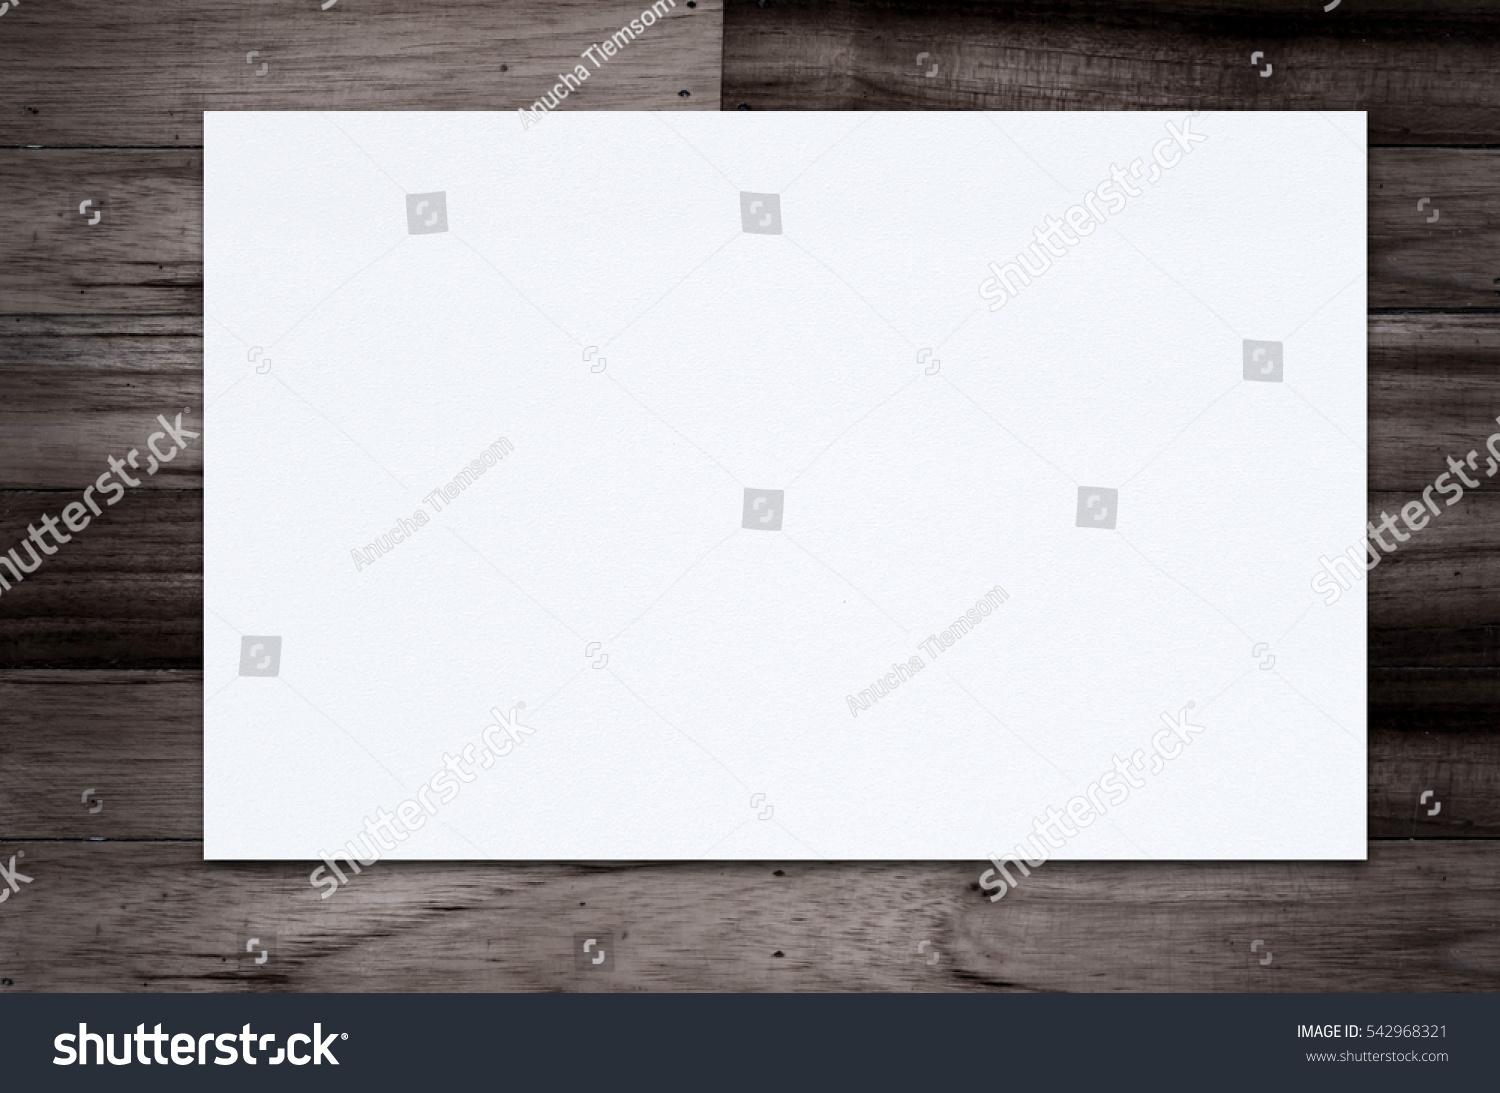 Blank paper texture on wood background. #542968321